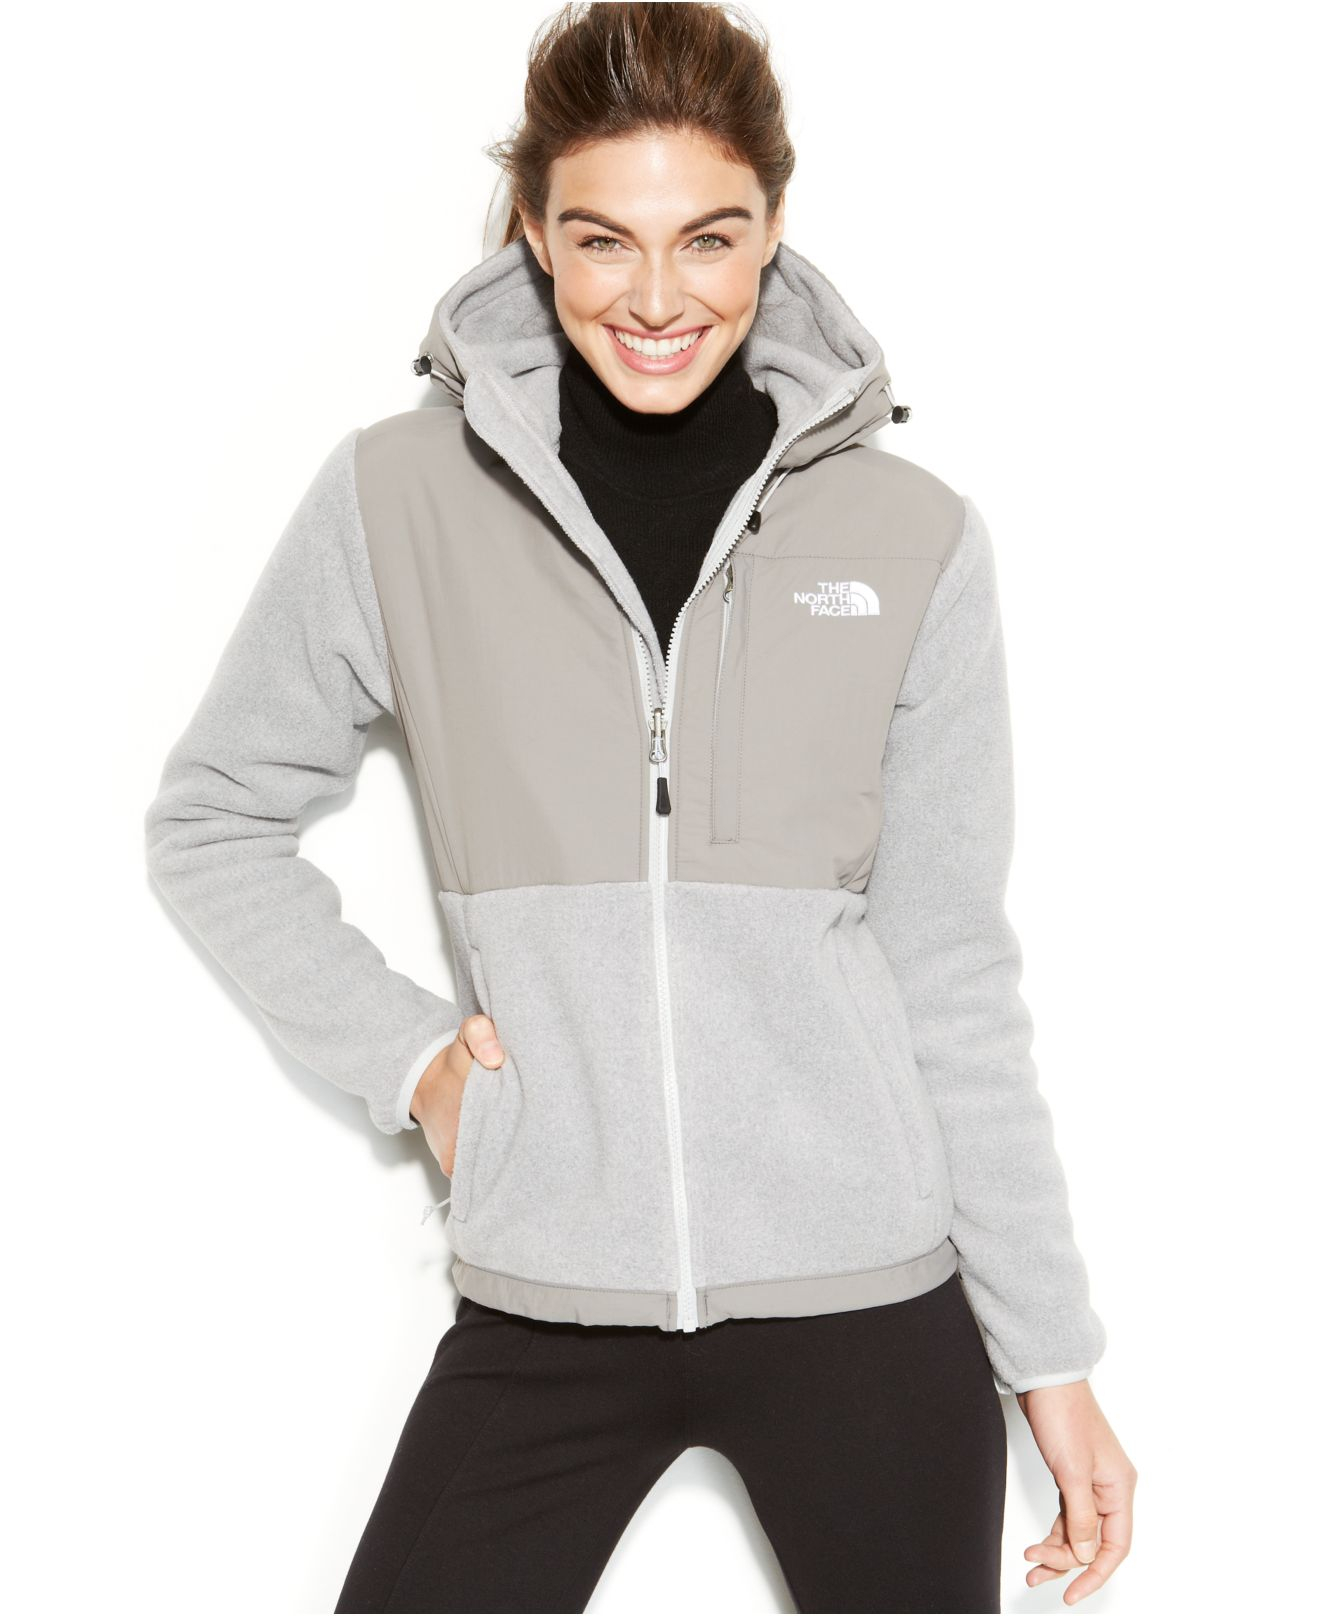 Lyst - The North Face Hooded Denali Fleece Jacket in Gray